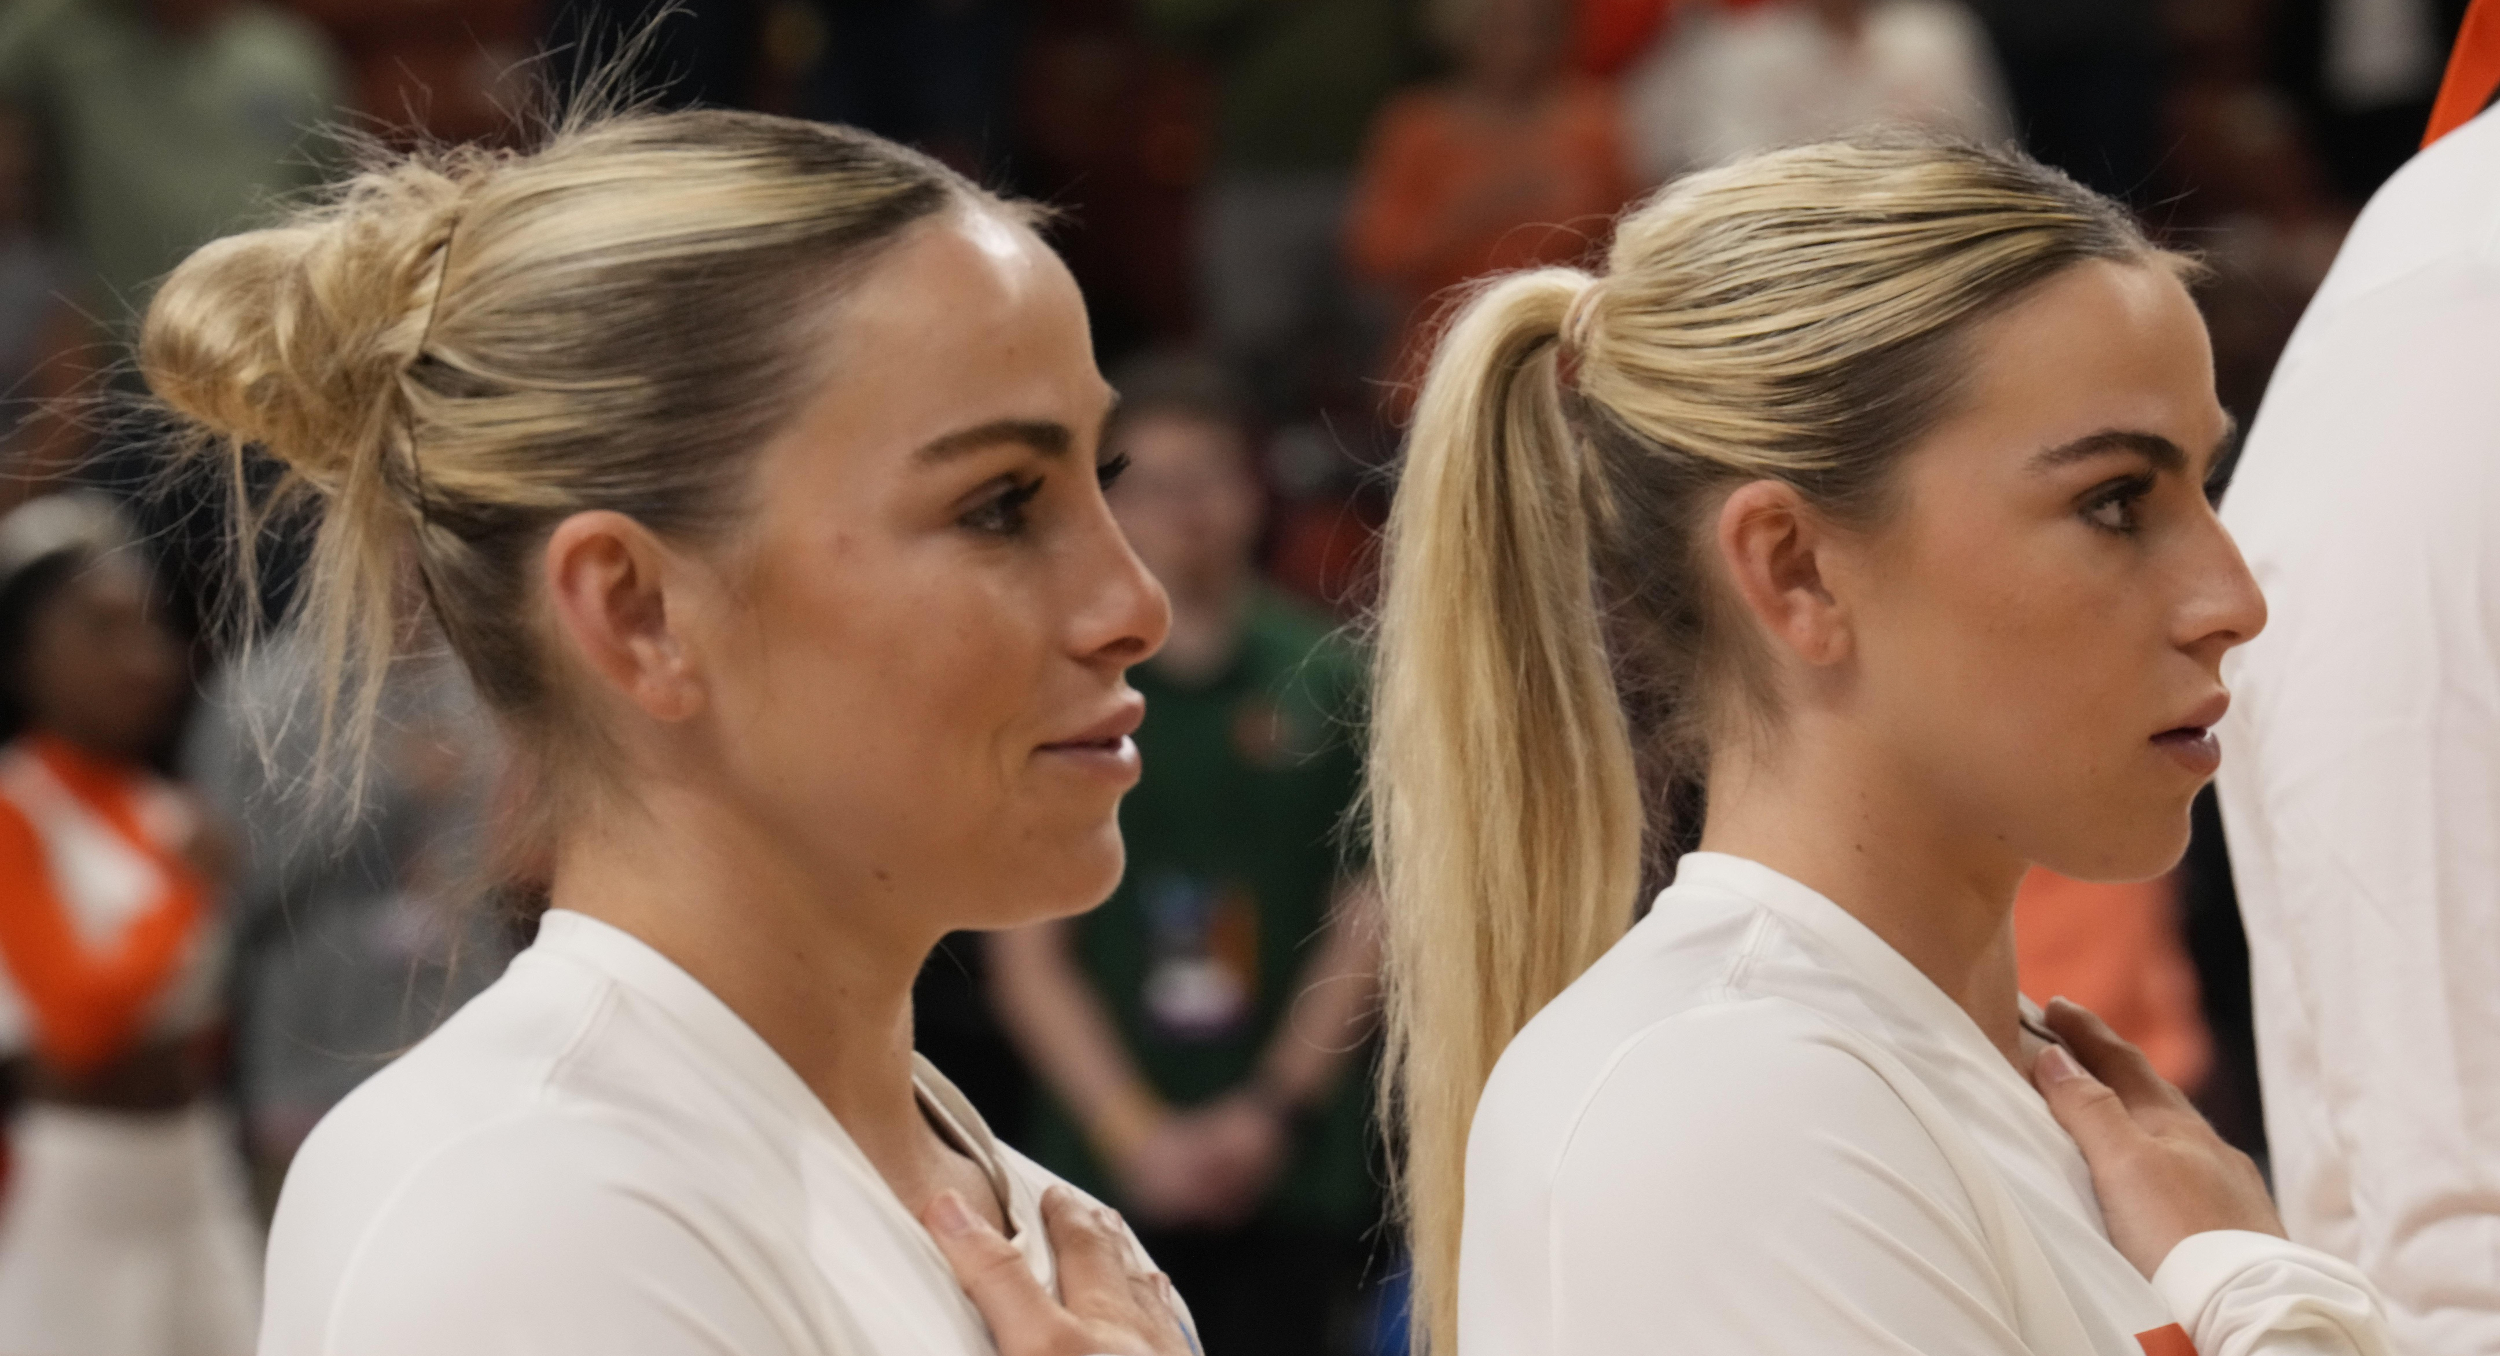 Hanna (L) and Haley Cavinder ahead of a March 26 NCAA Tournament game.